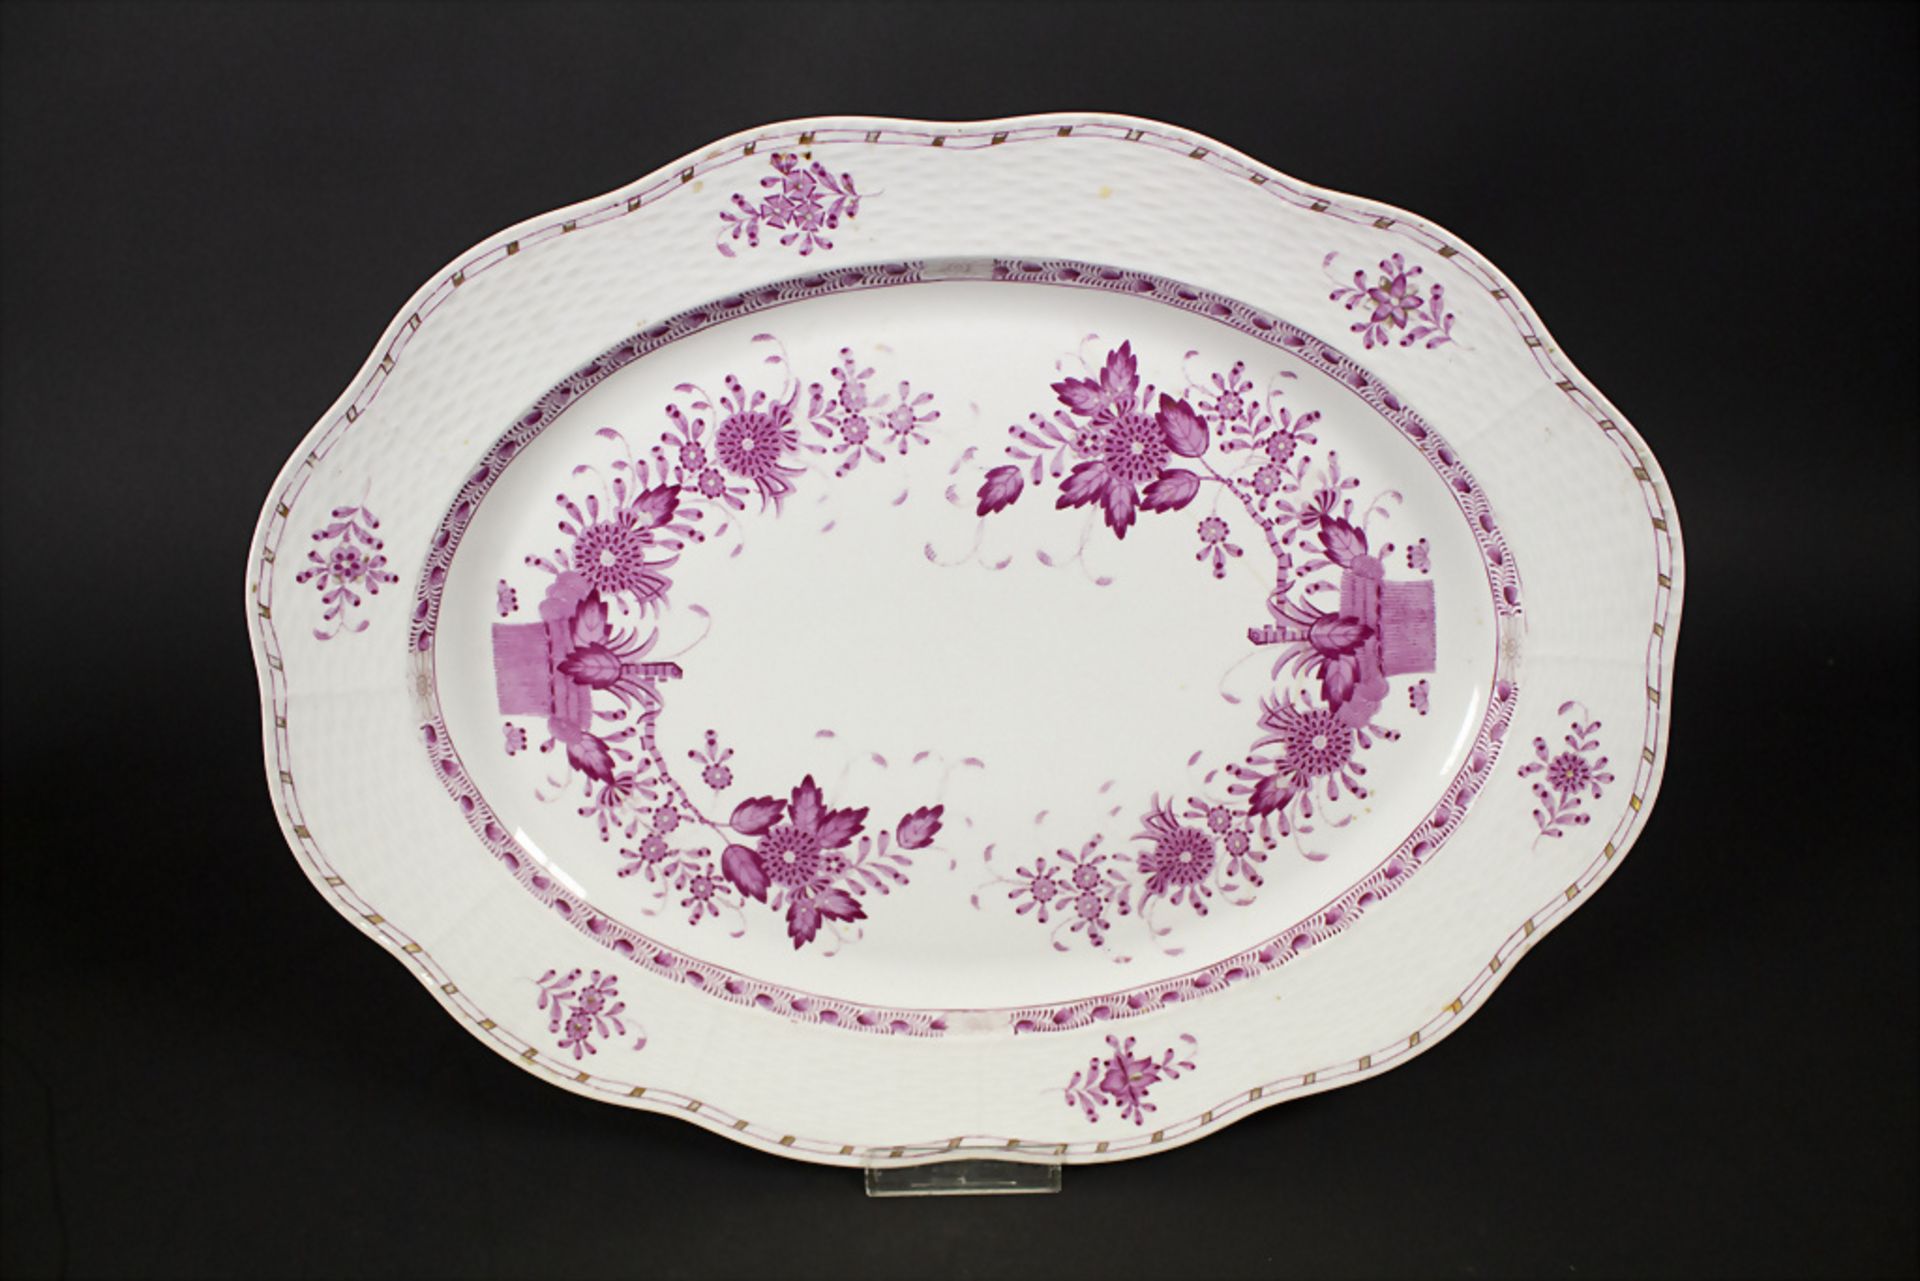 Ovale Platte / A large tray, Herend, Ungarn, 19. Jh.